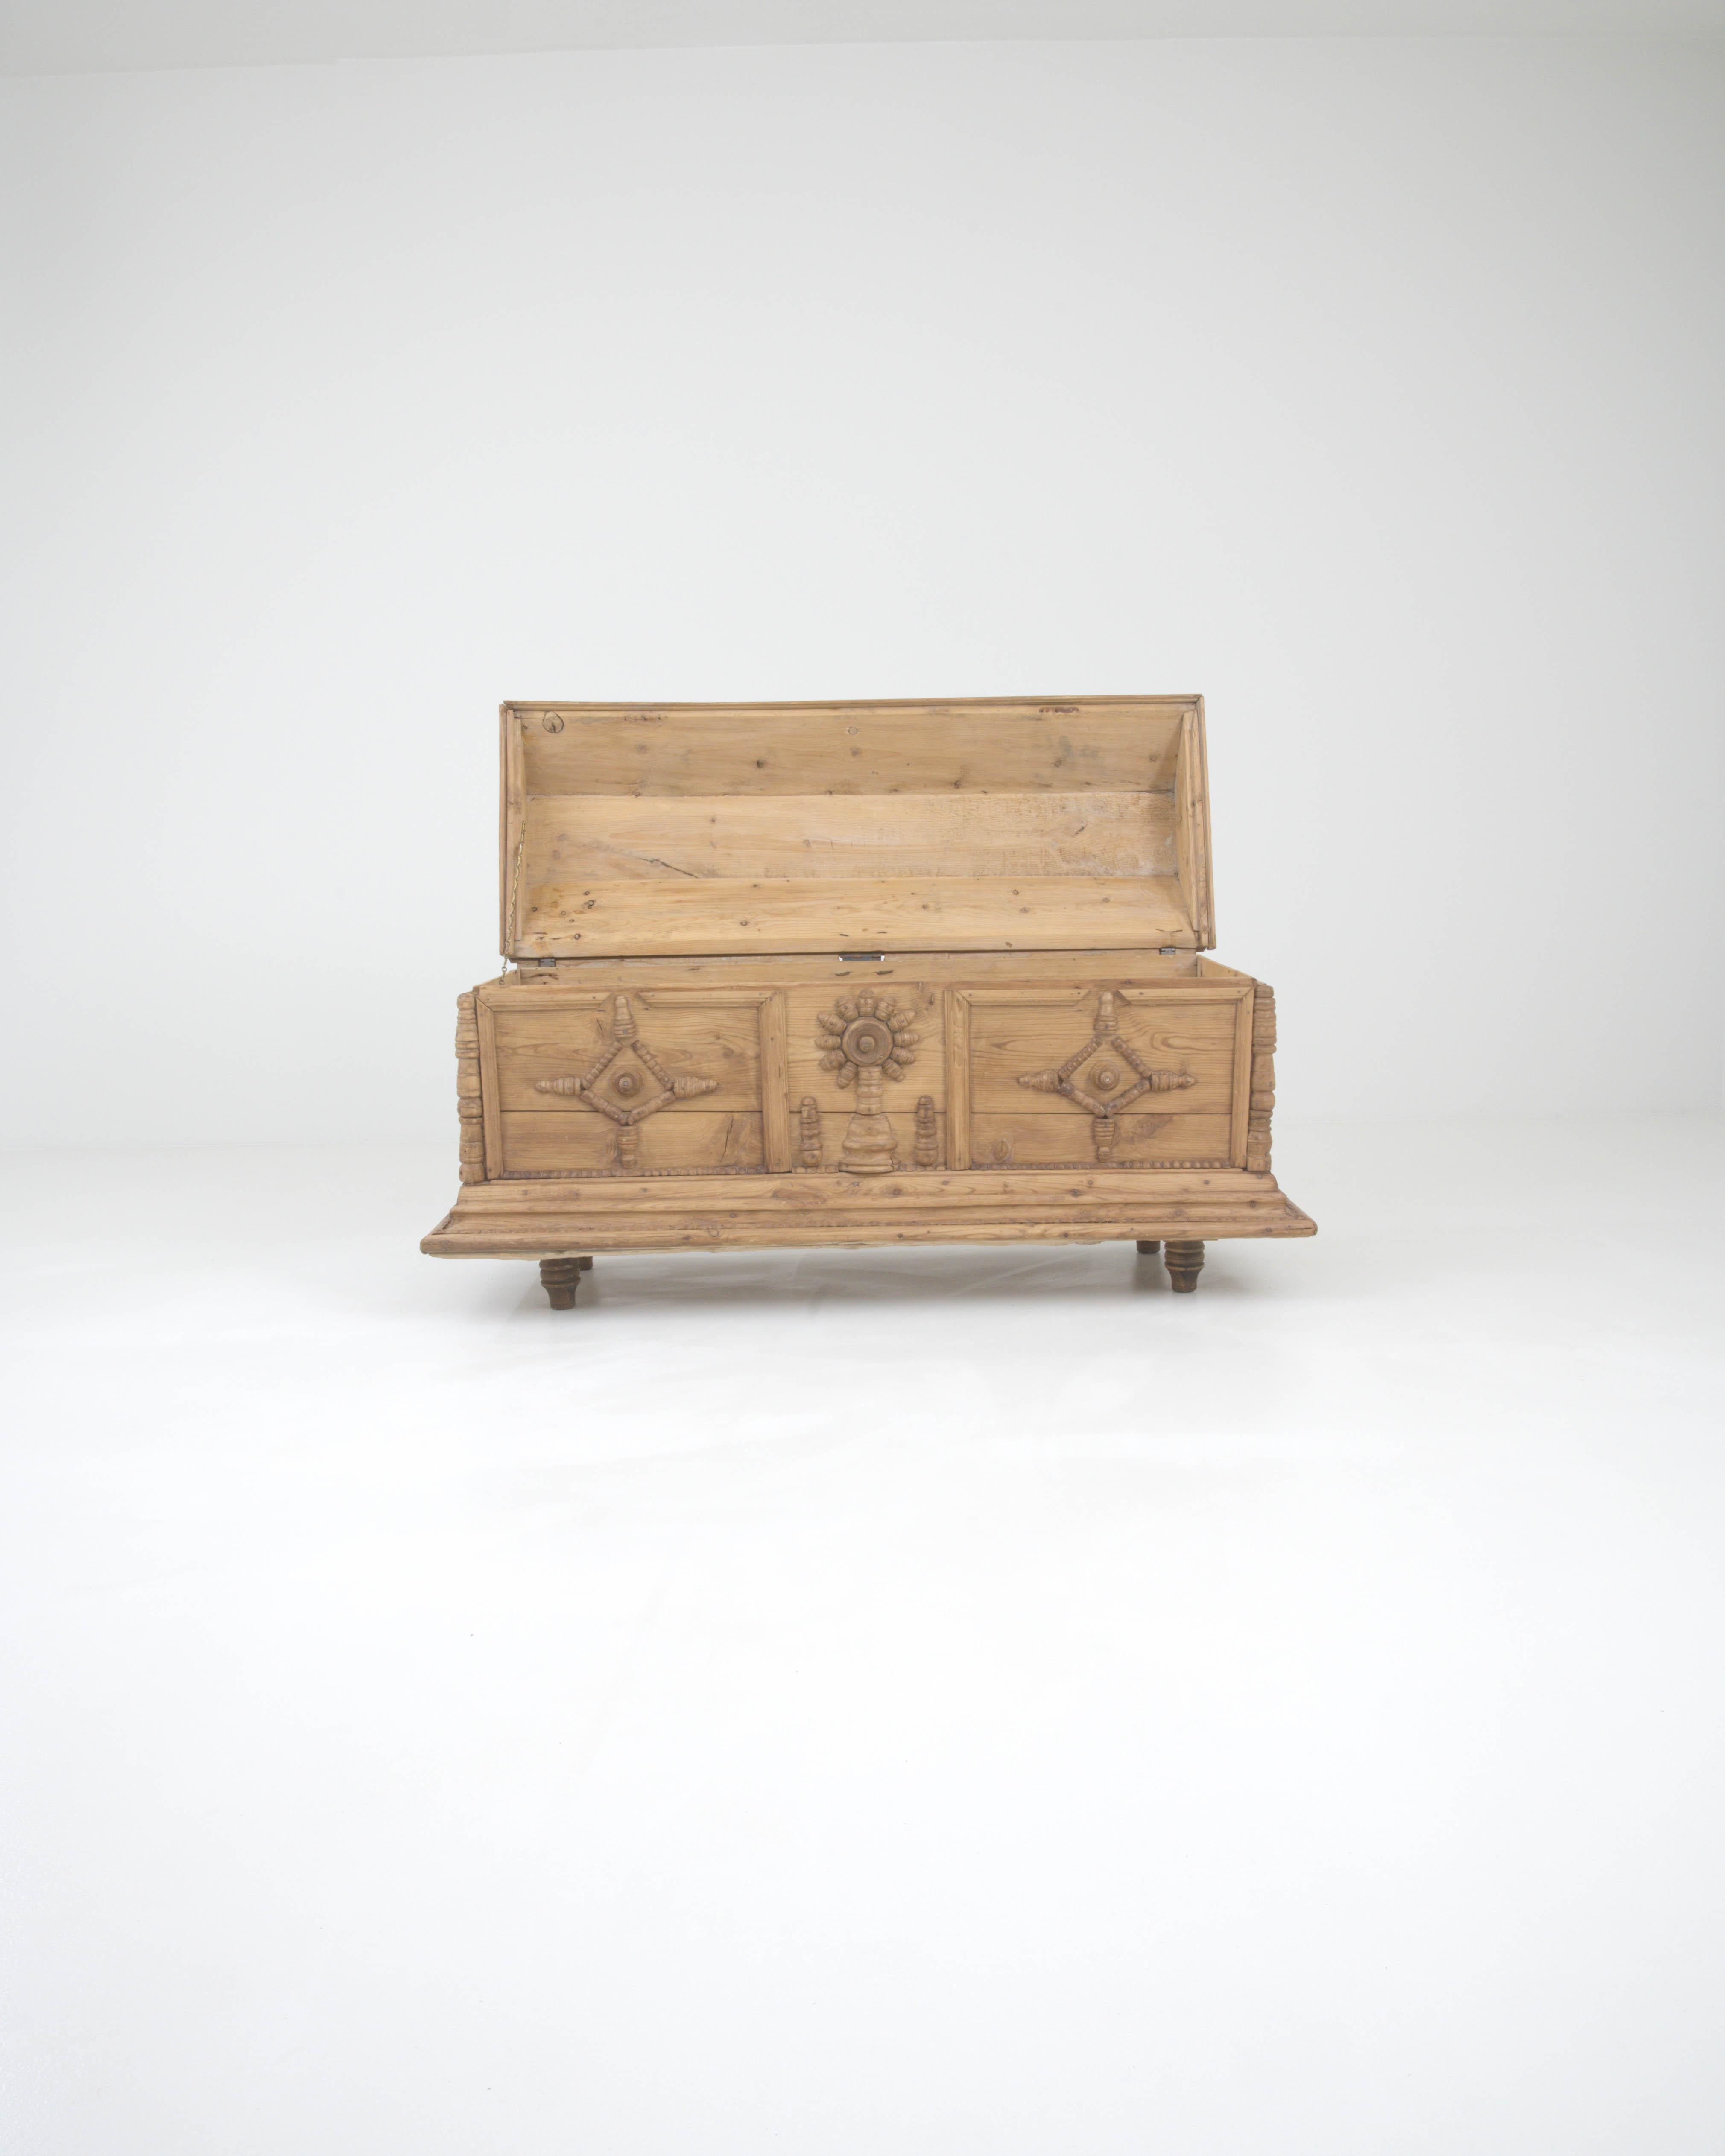 Step back into the elegance of the early 19th century with this exquisite French wooden chest, a masterpiece that resonates with the period's artistry and finesse. Handcrafted with an eye for detail, this timeless piece showcases ornamental carvings